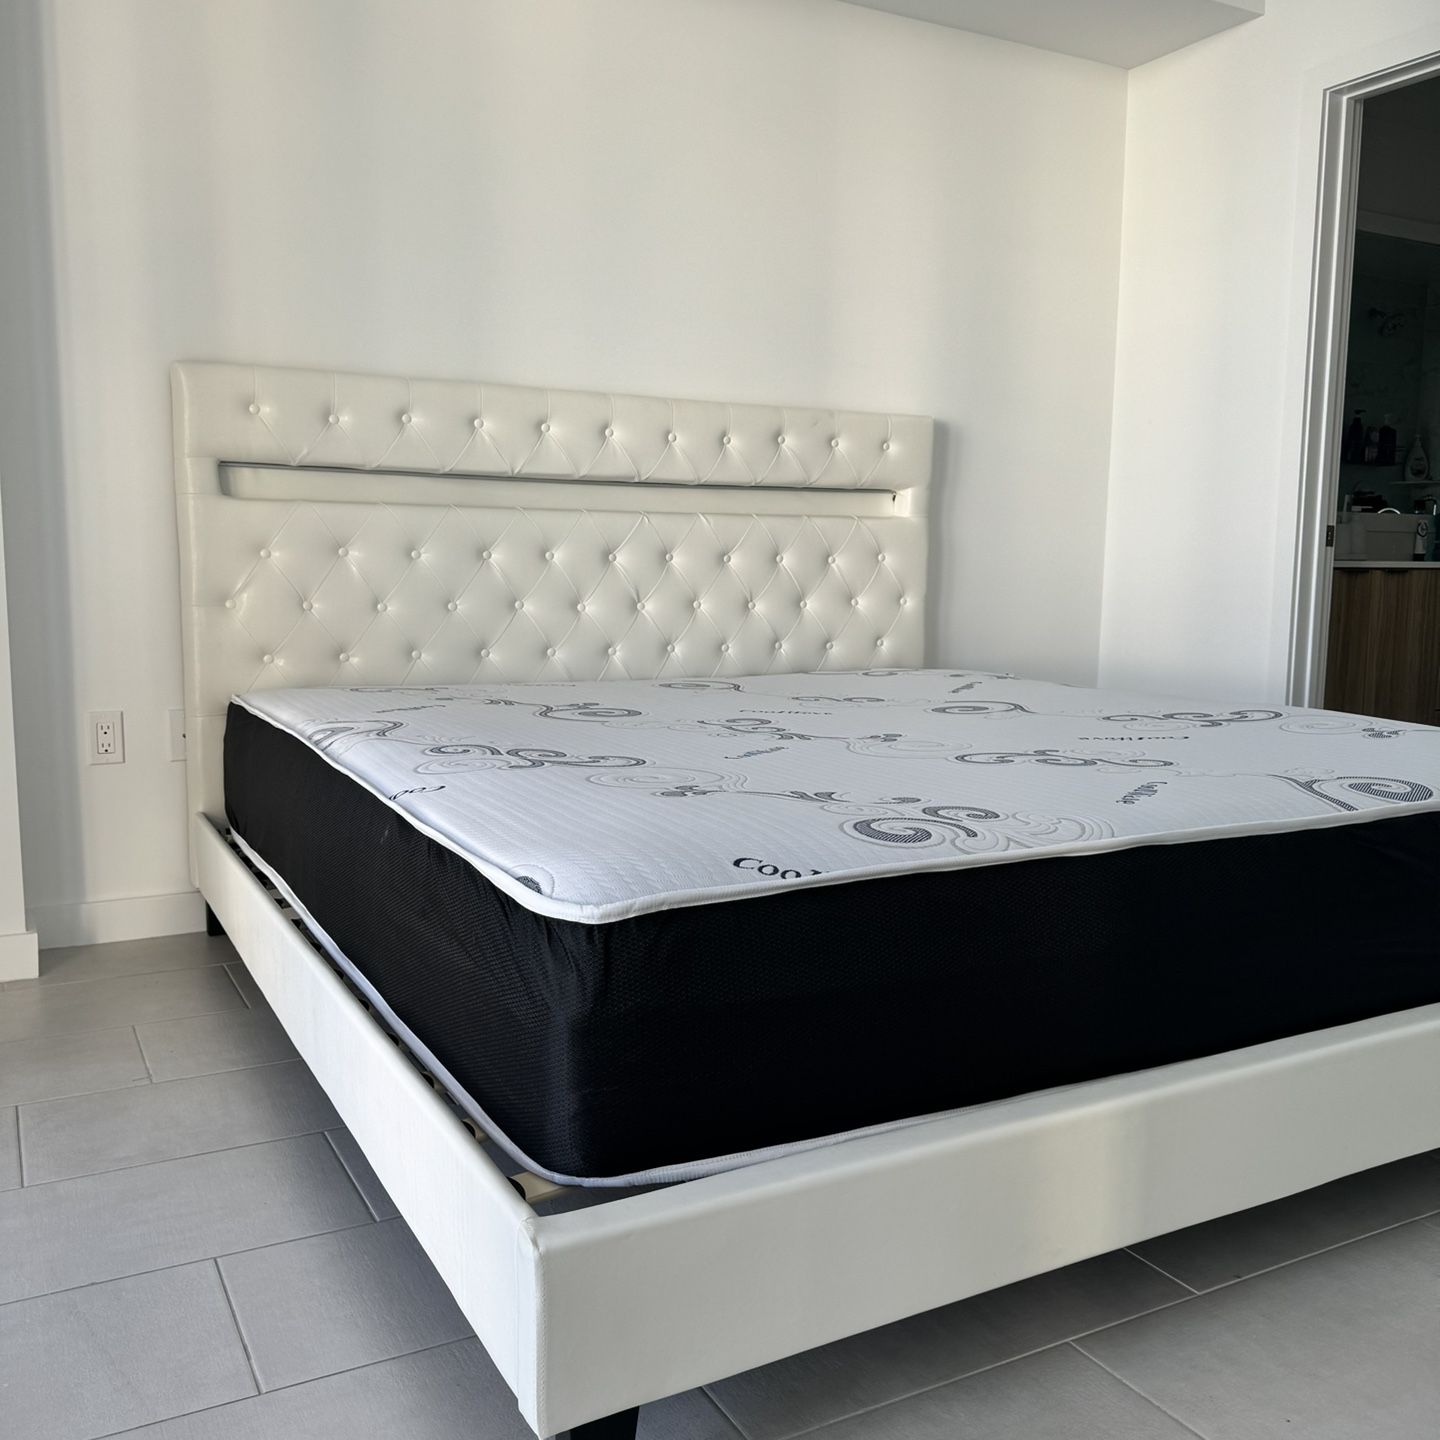 Brand New King Size Bed Frame with Mattress / Cama King con Colchón Nueva a Estrenar … Delivery Available 🚚